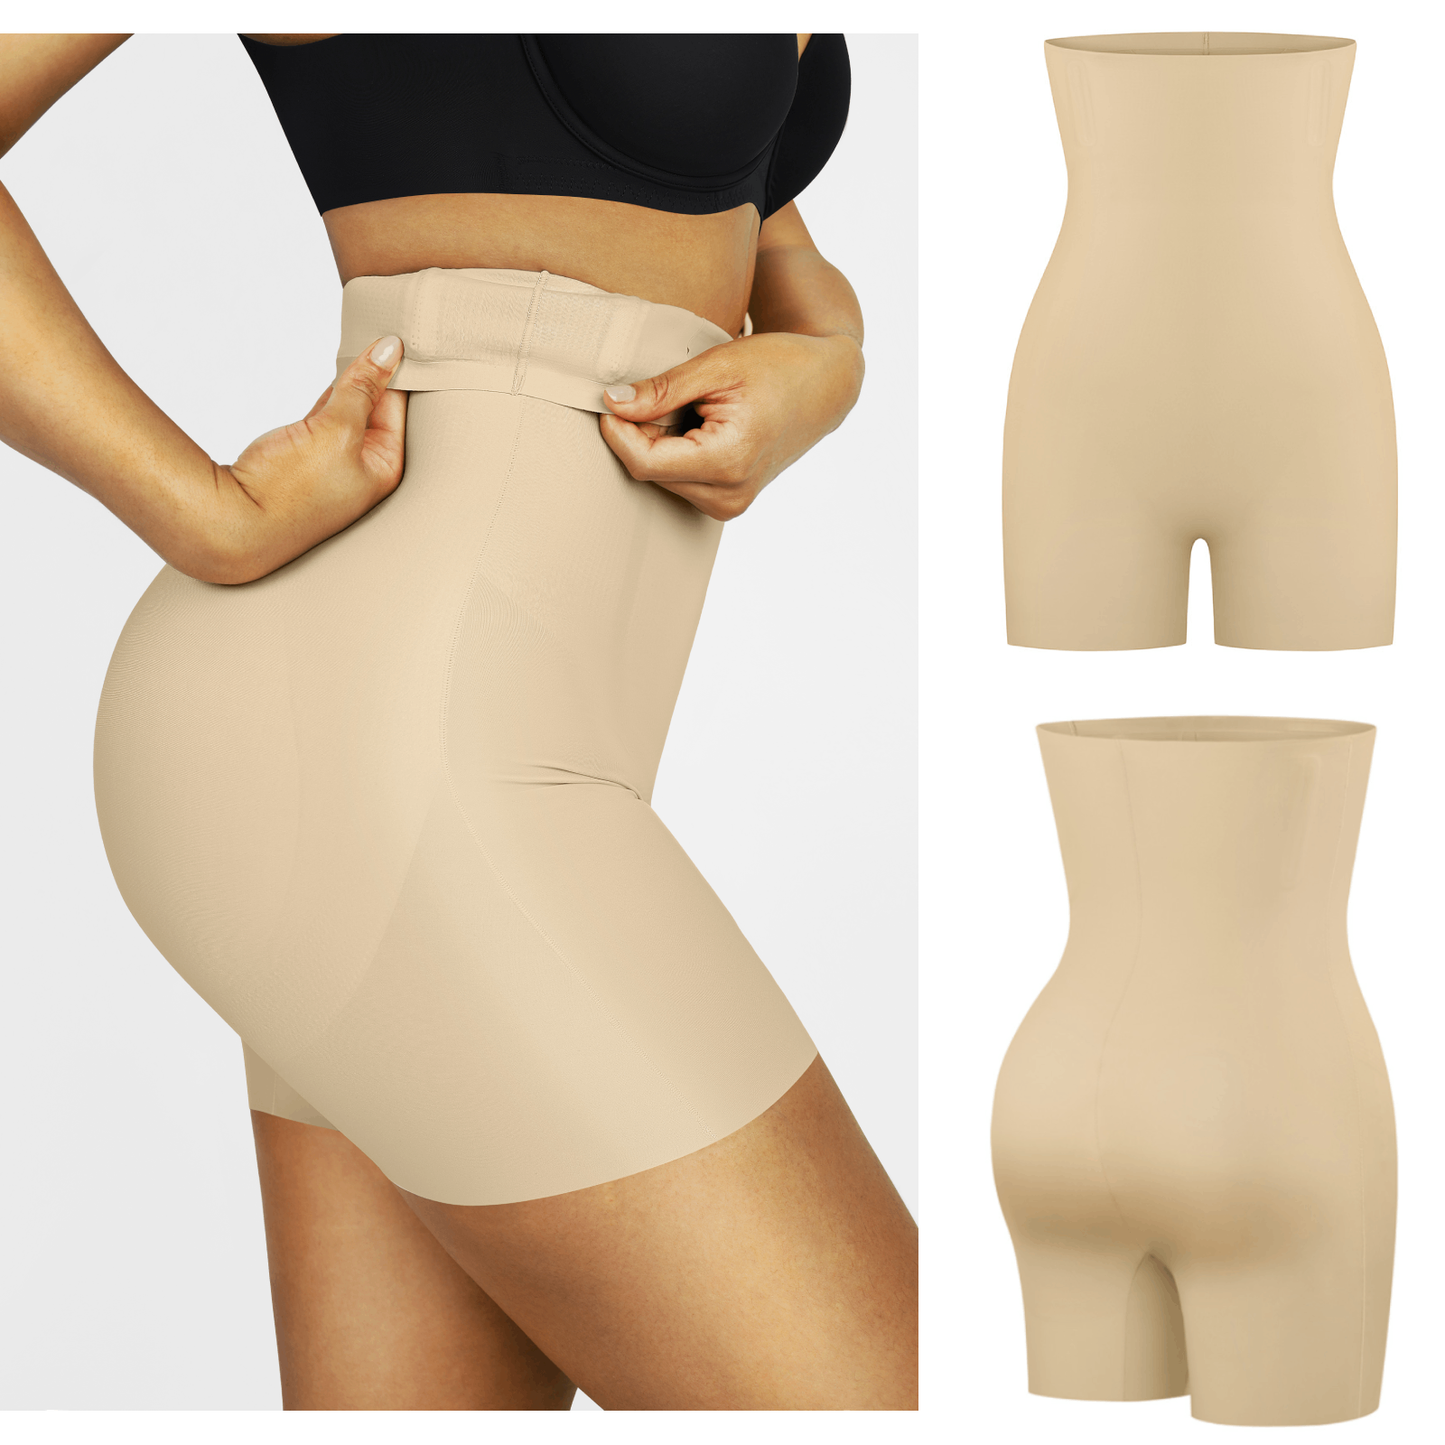 Shapewear High-waisted Panties Shorts Removable with Buttock Pad